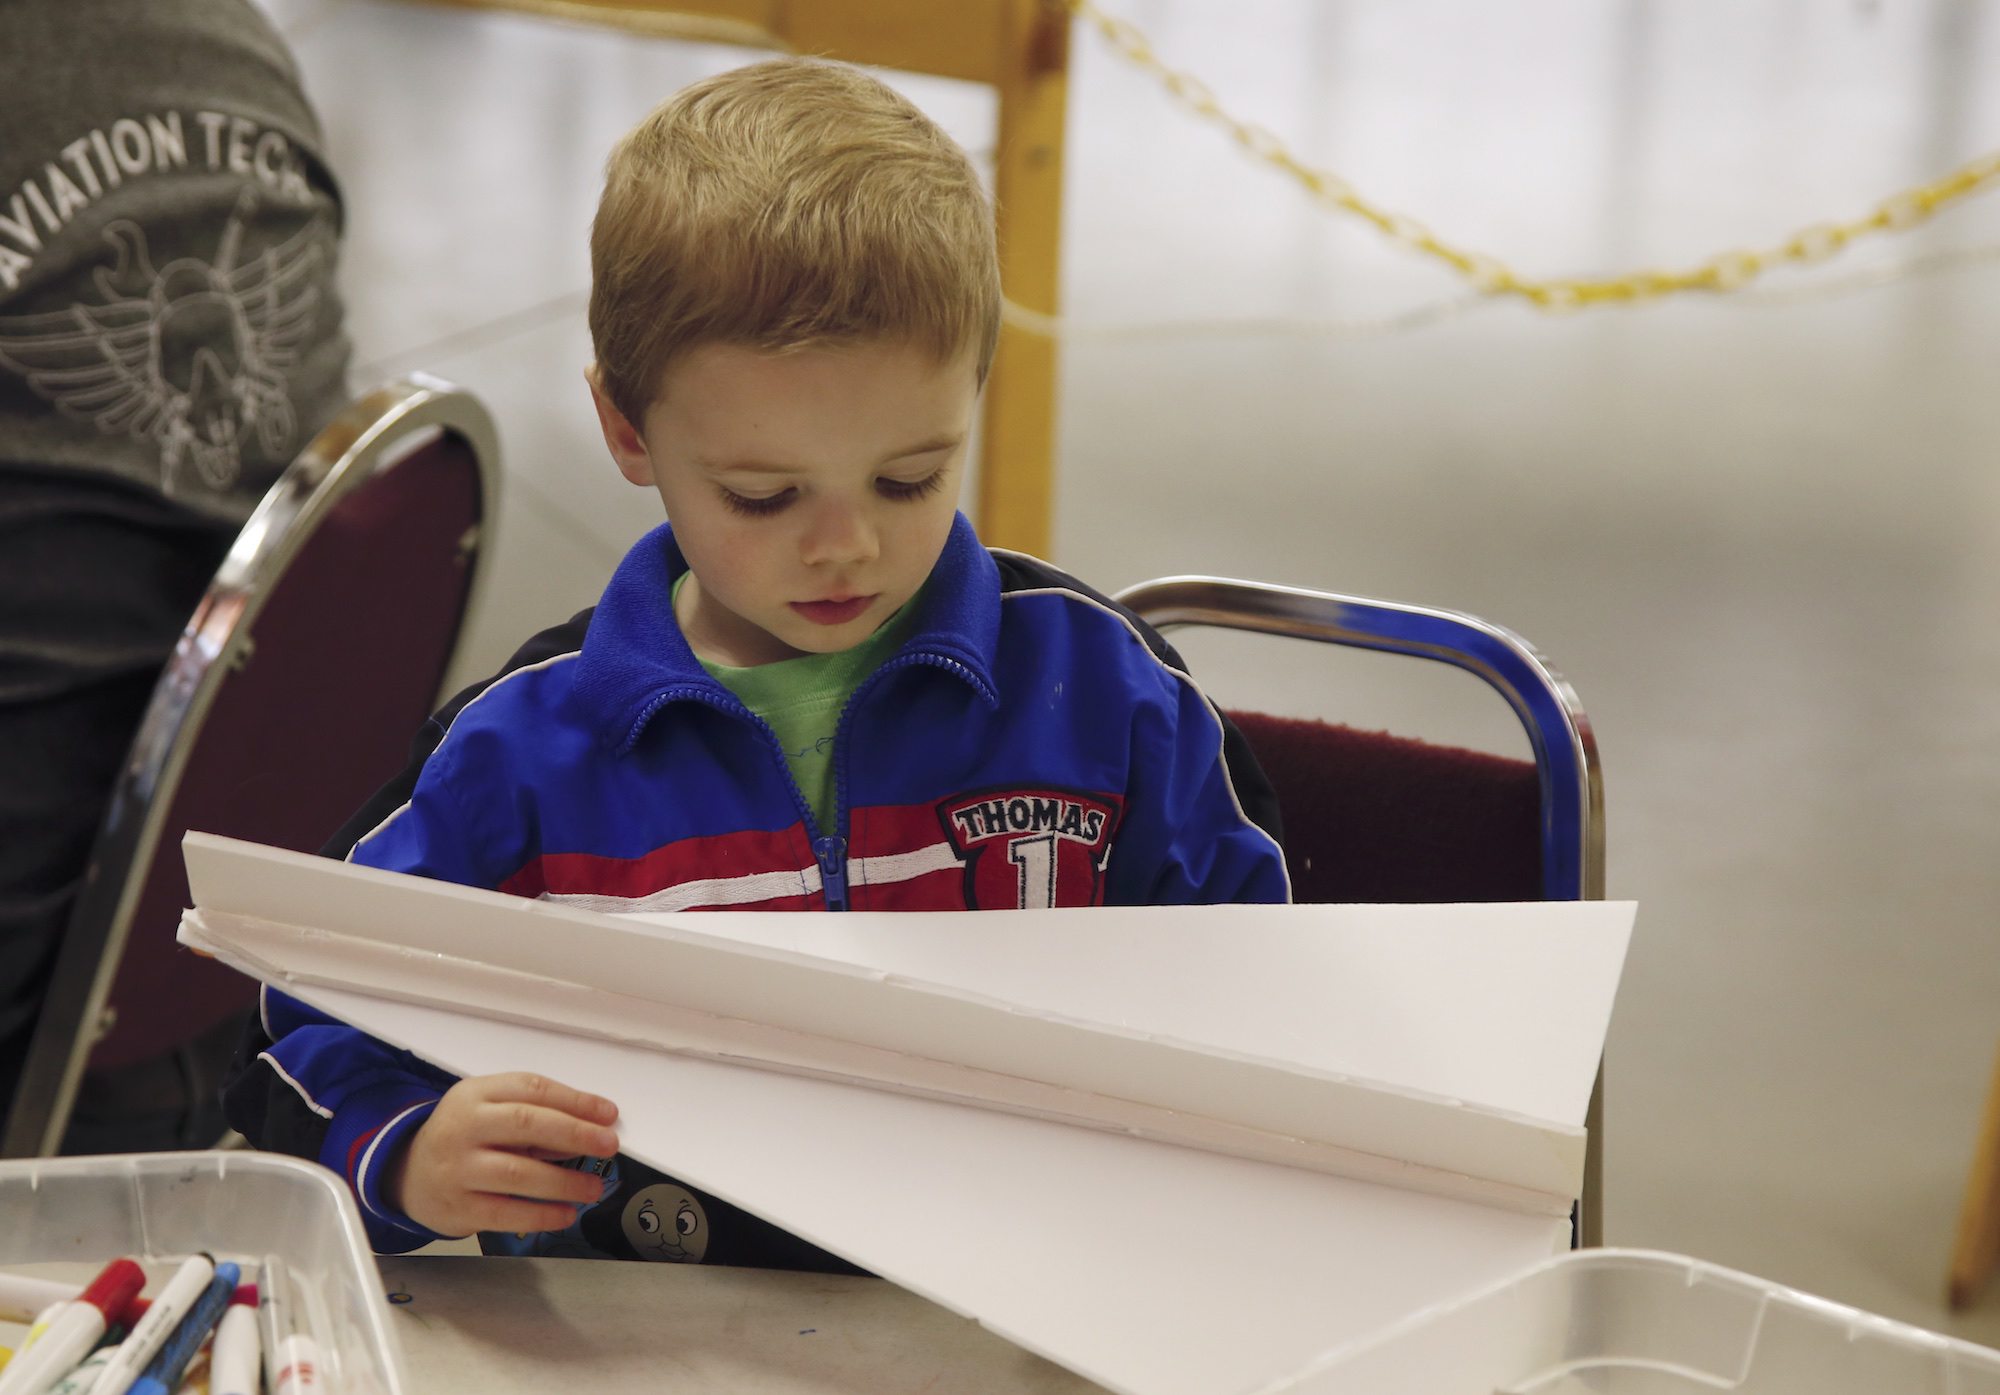 Hunter Ryan, 3, works on a glider at the Pierson Field Education Center. The center hosted a weekend of flight simulation and model-glider building for kids.